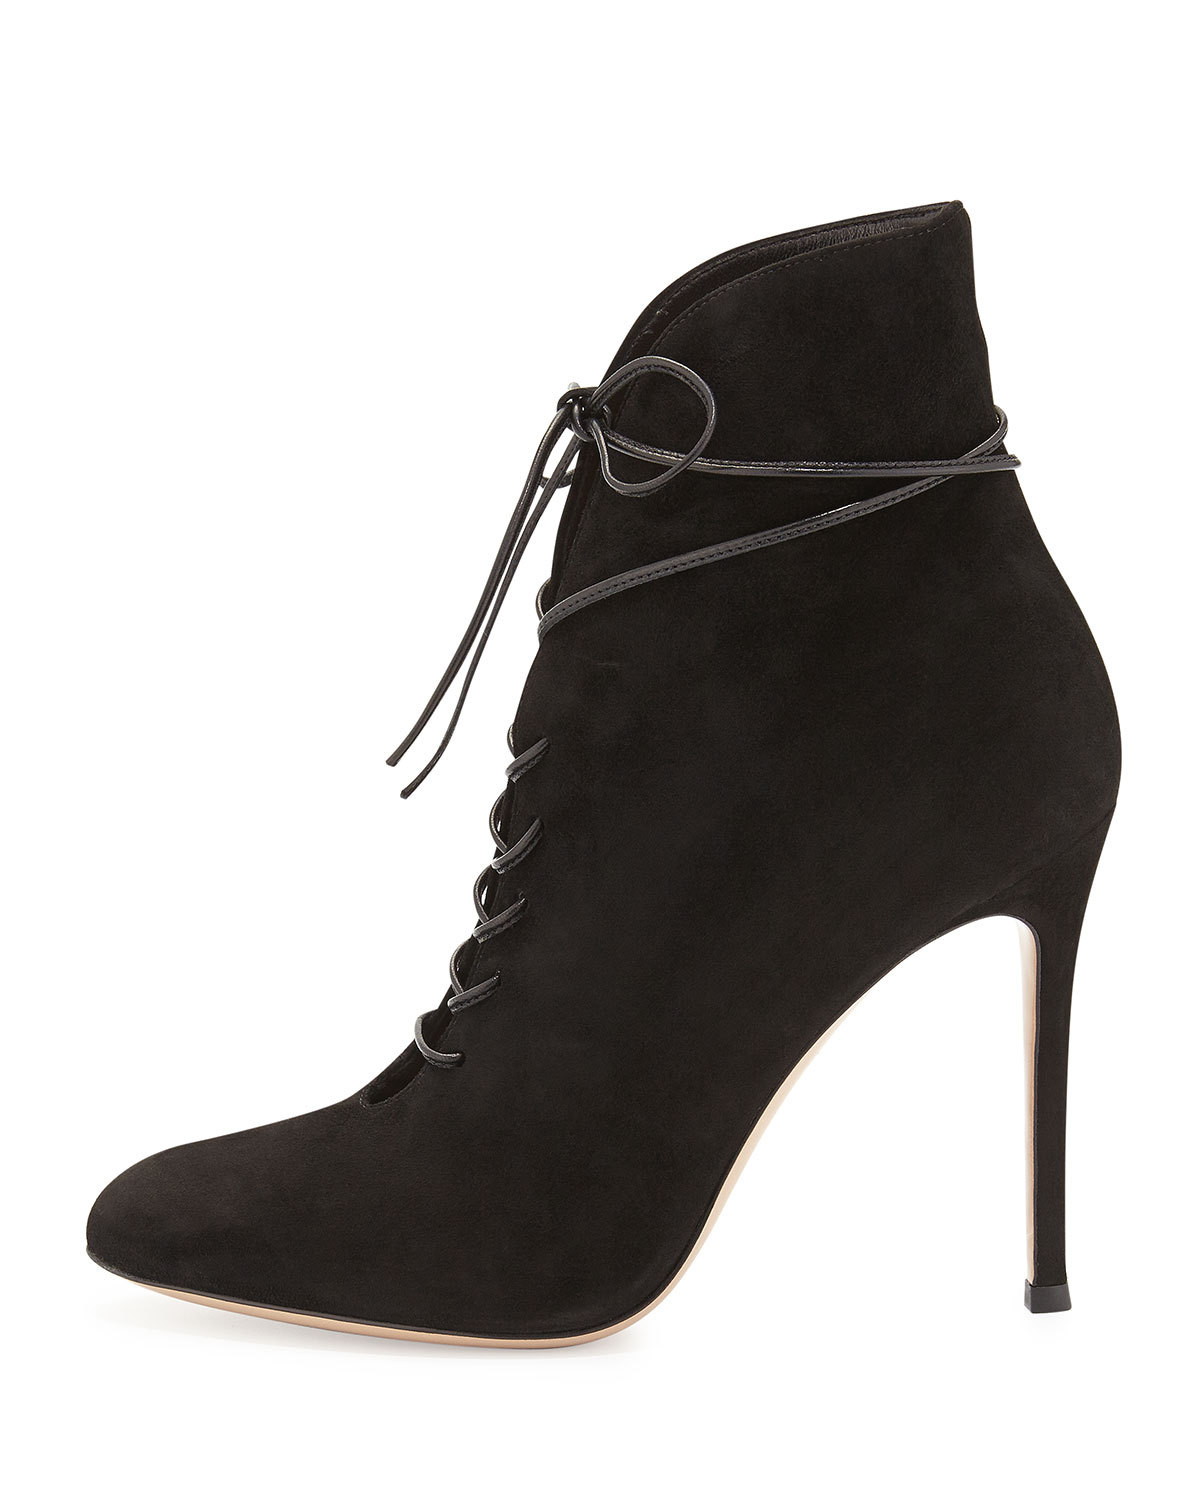 Gianvito Rossi Suede Lace-Up Bootie in Black | Lyst